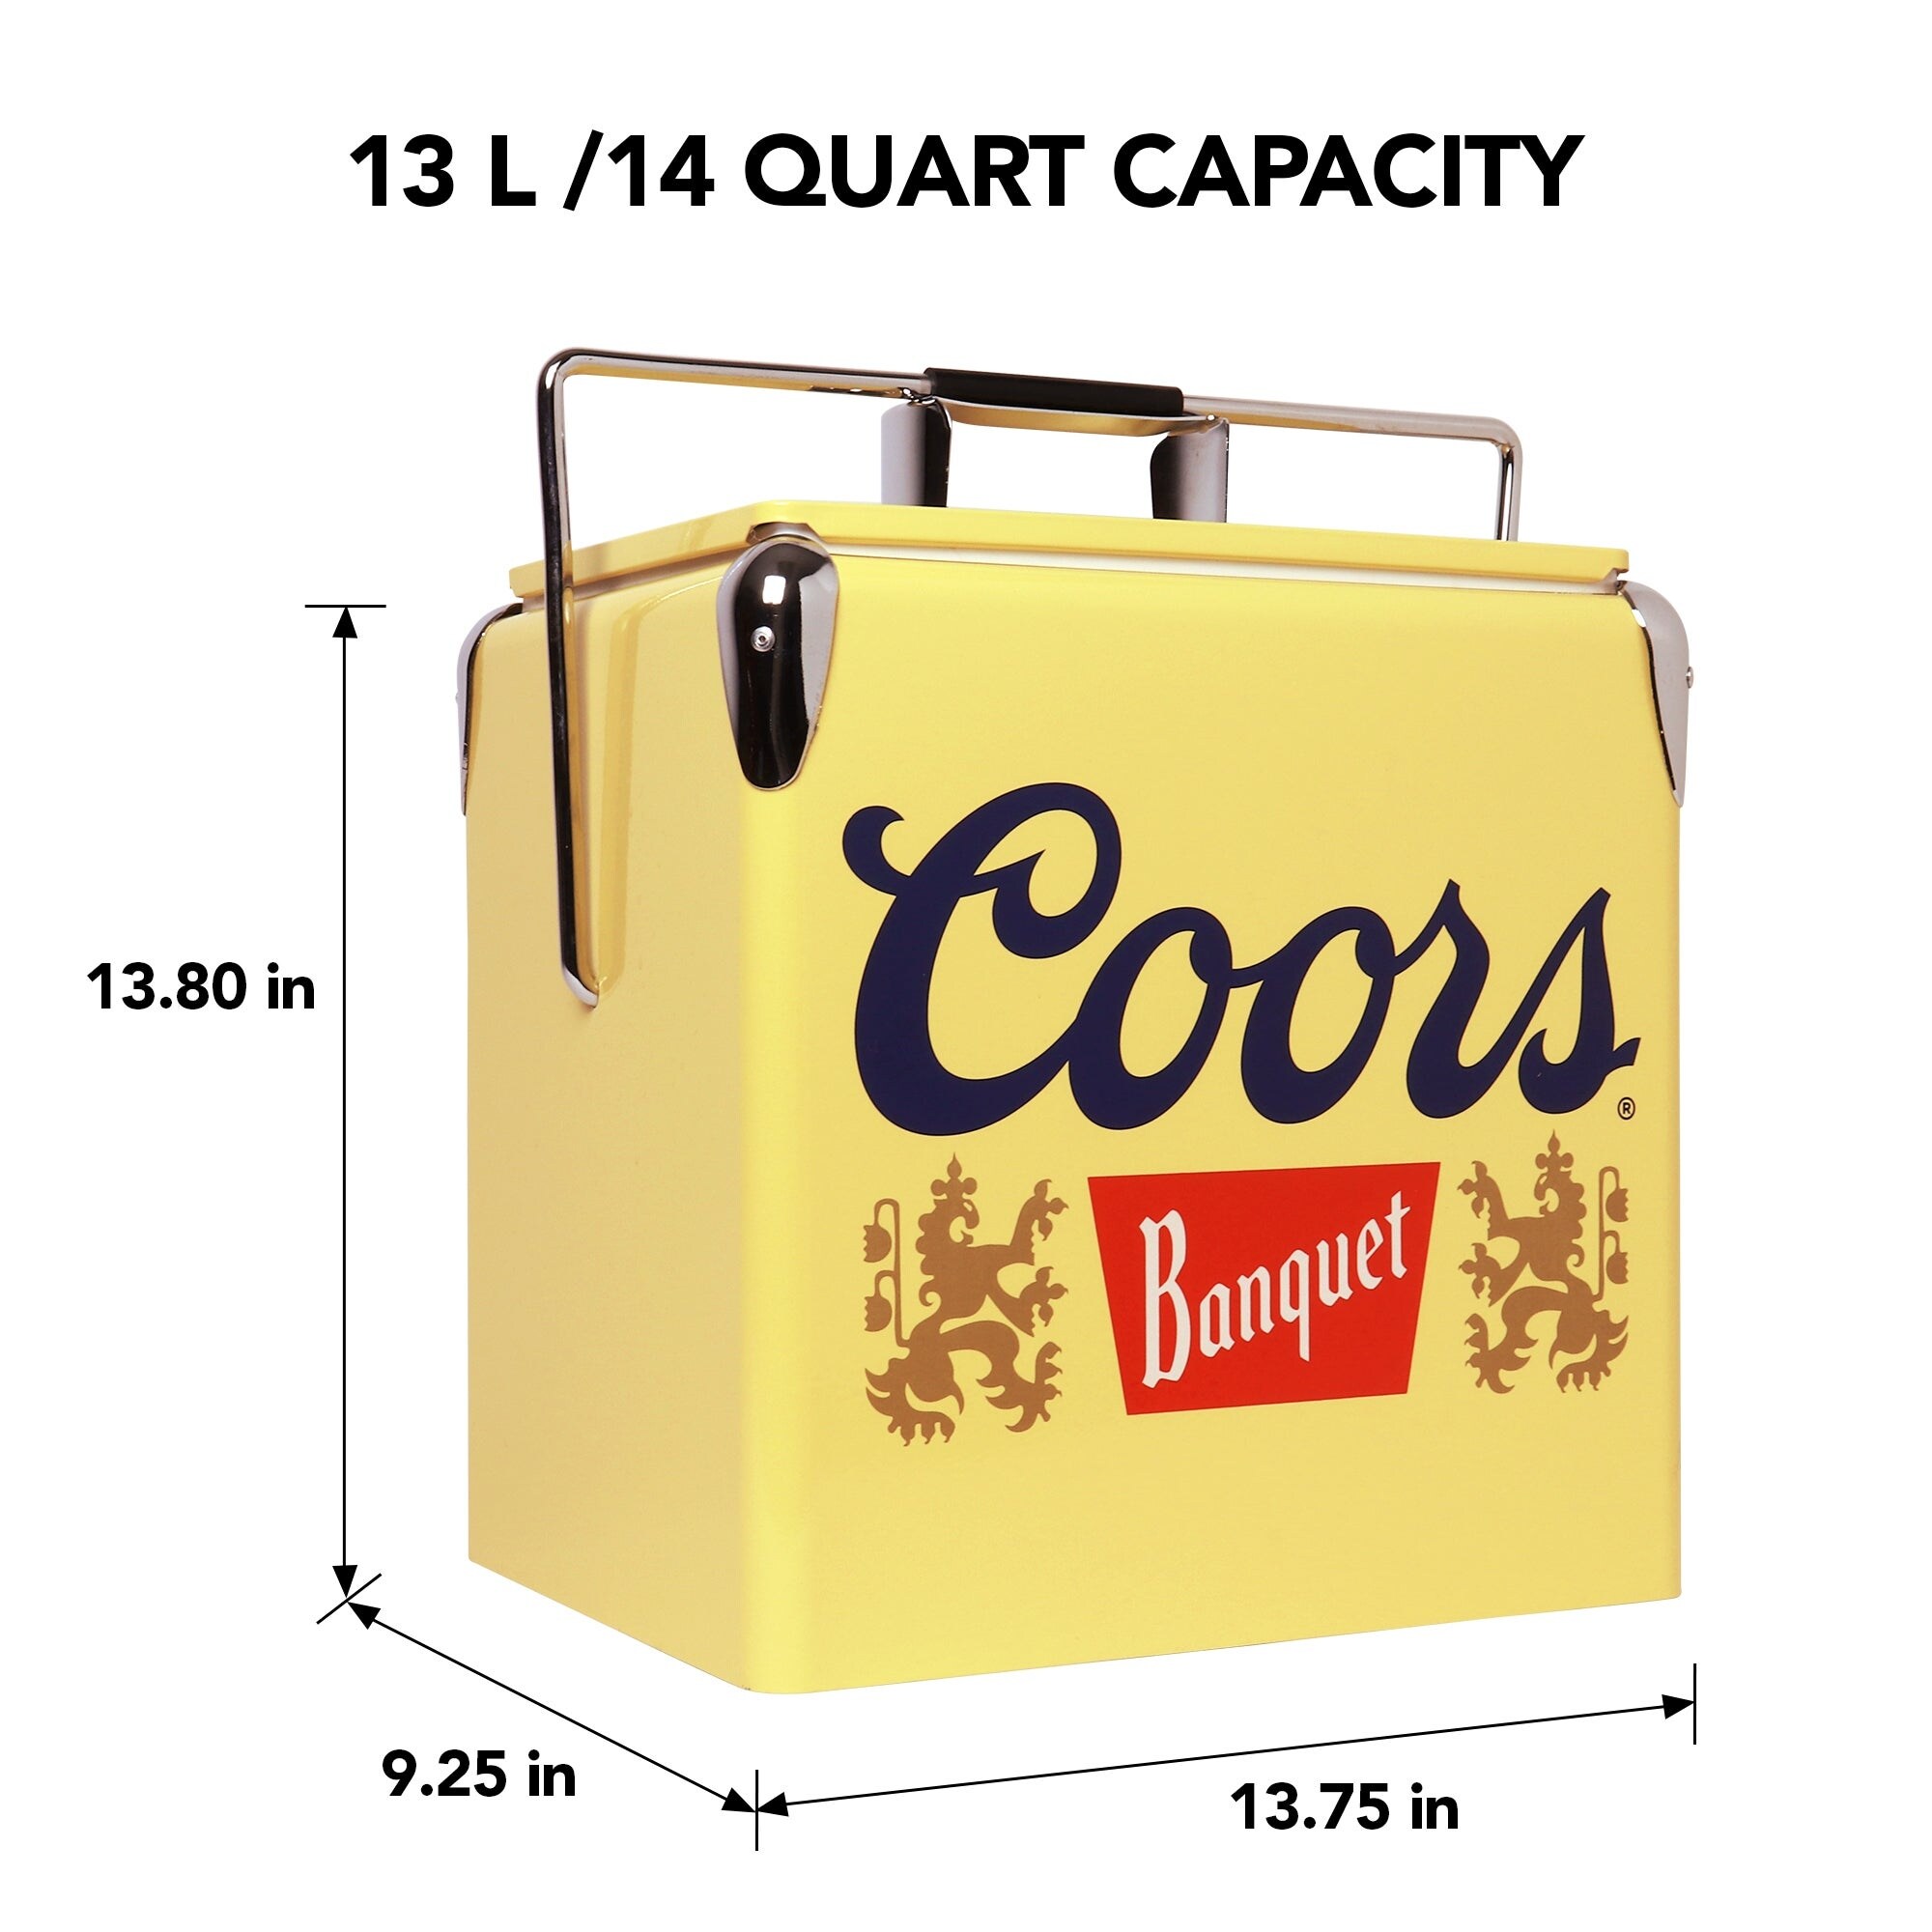 https://ak1.ostkcdn.com/images/products/is/images/direct/17f157556f339a0a20d13e707e780a68279ab442/14-Quart-Coors-13-Ltr-Hard-Sided-Ice-Chest-Cooler.jpg